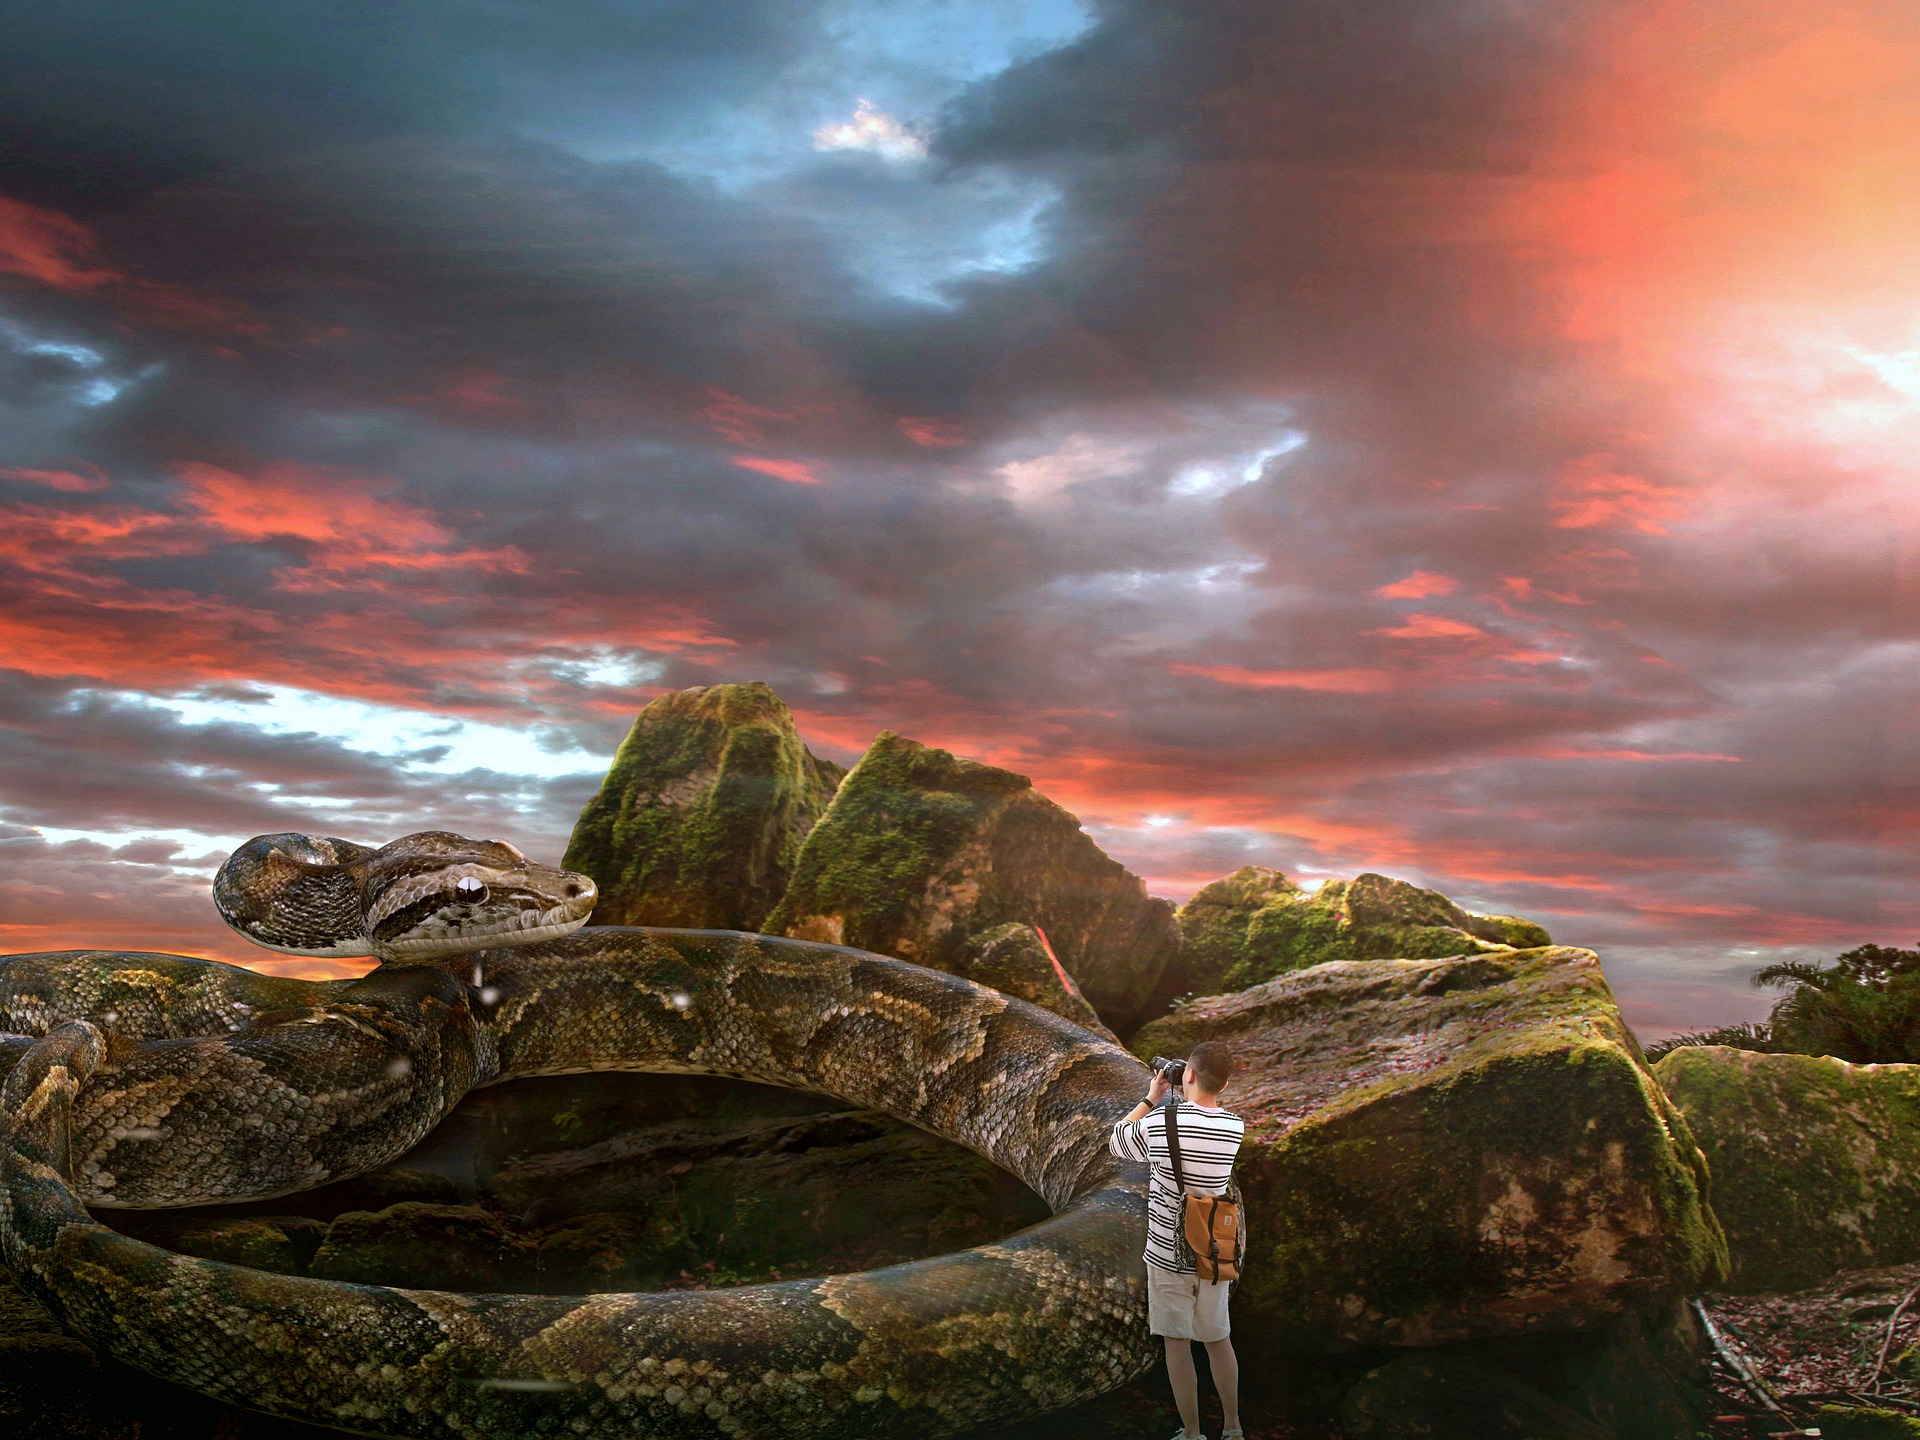 A fantasy image. A man photographs a beautiful mountain landscape. A snake as big as the mountains looks at him.